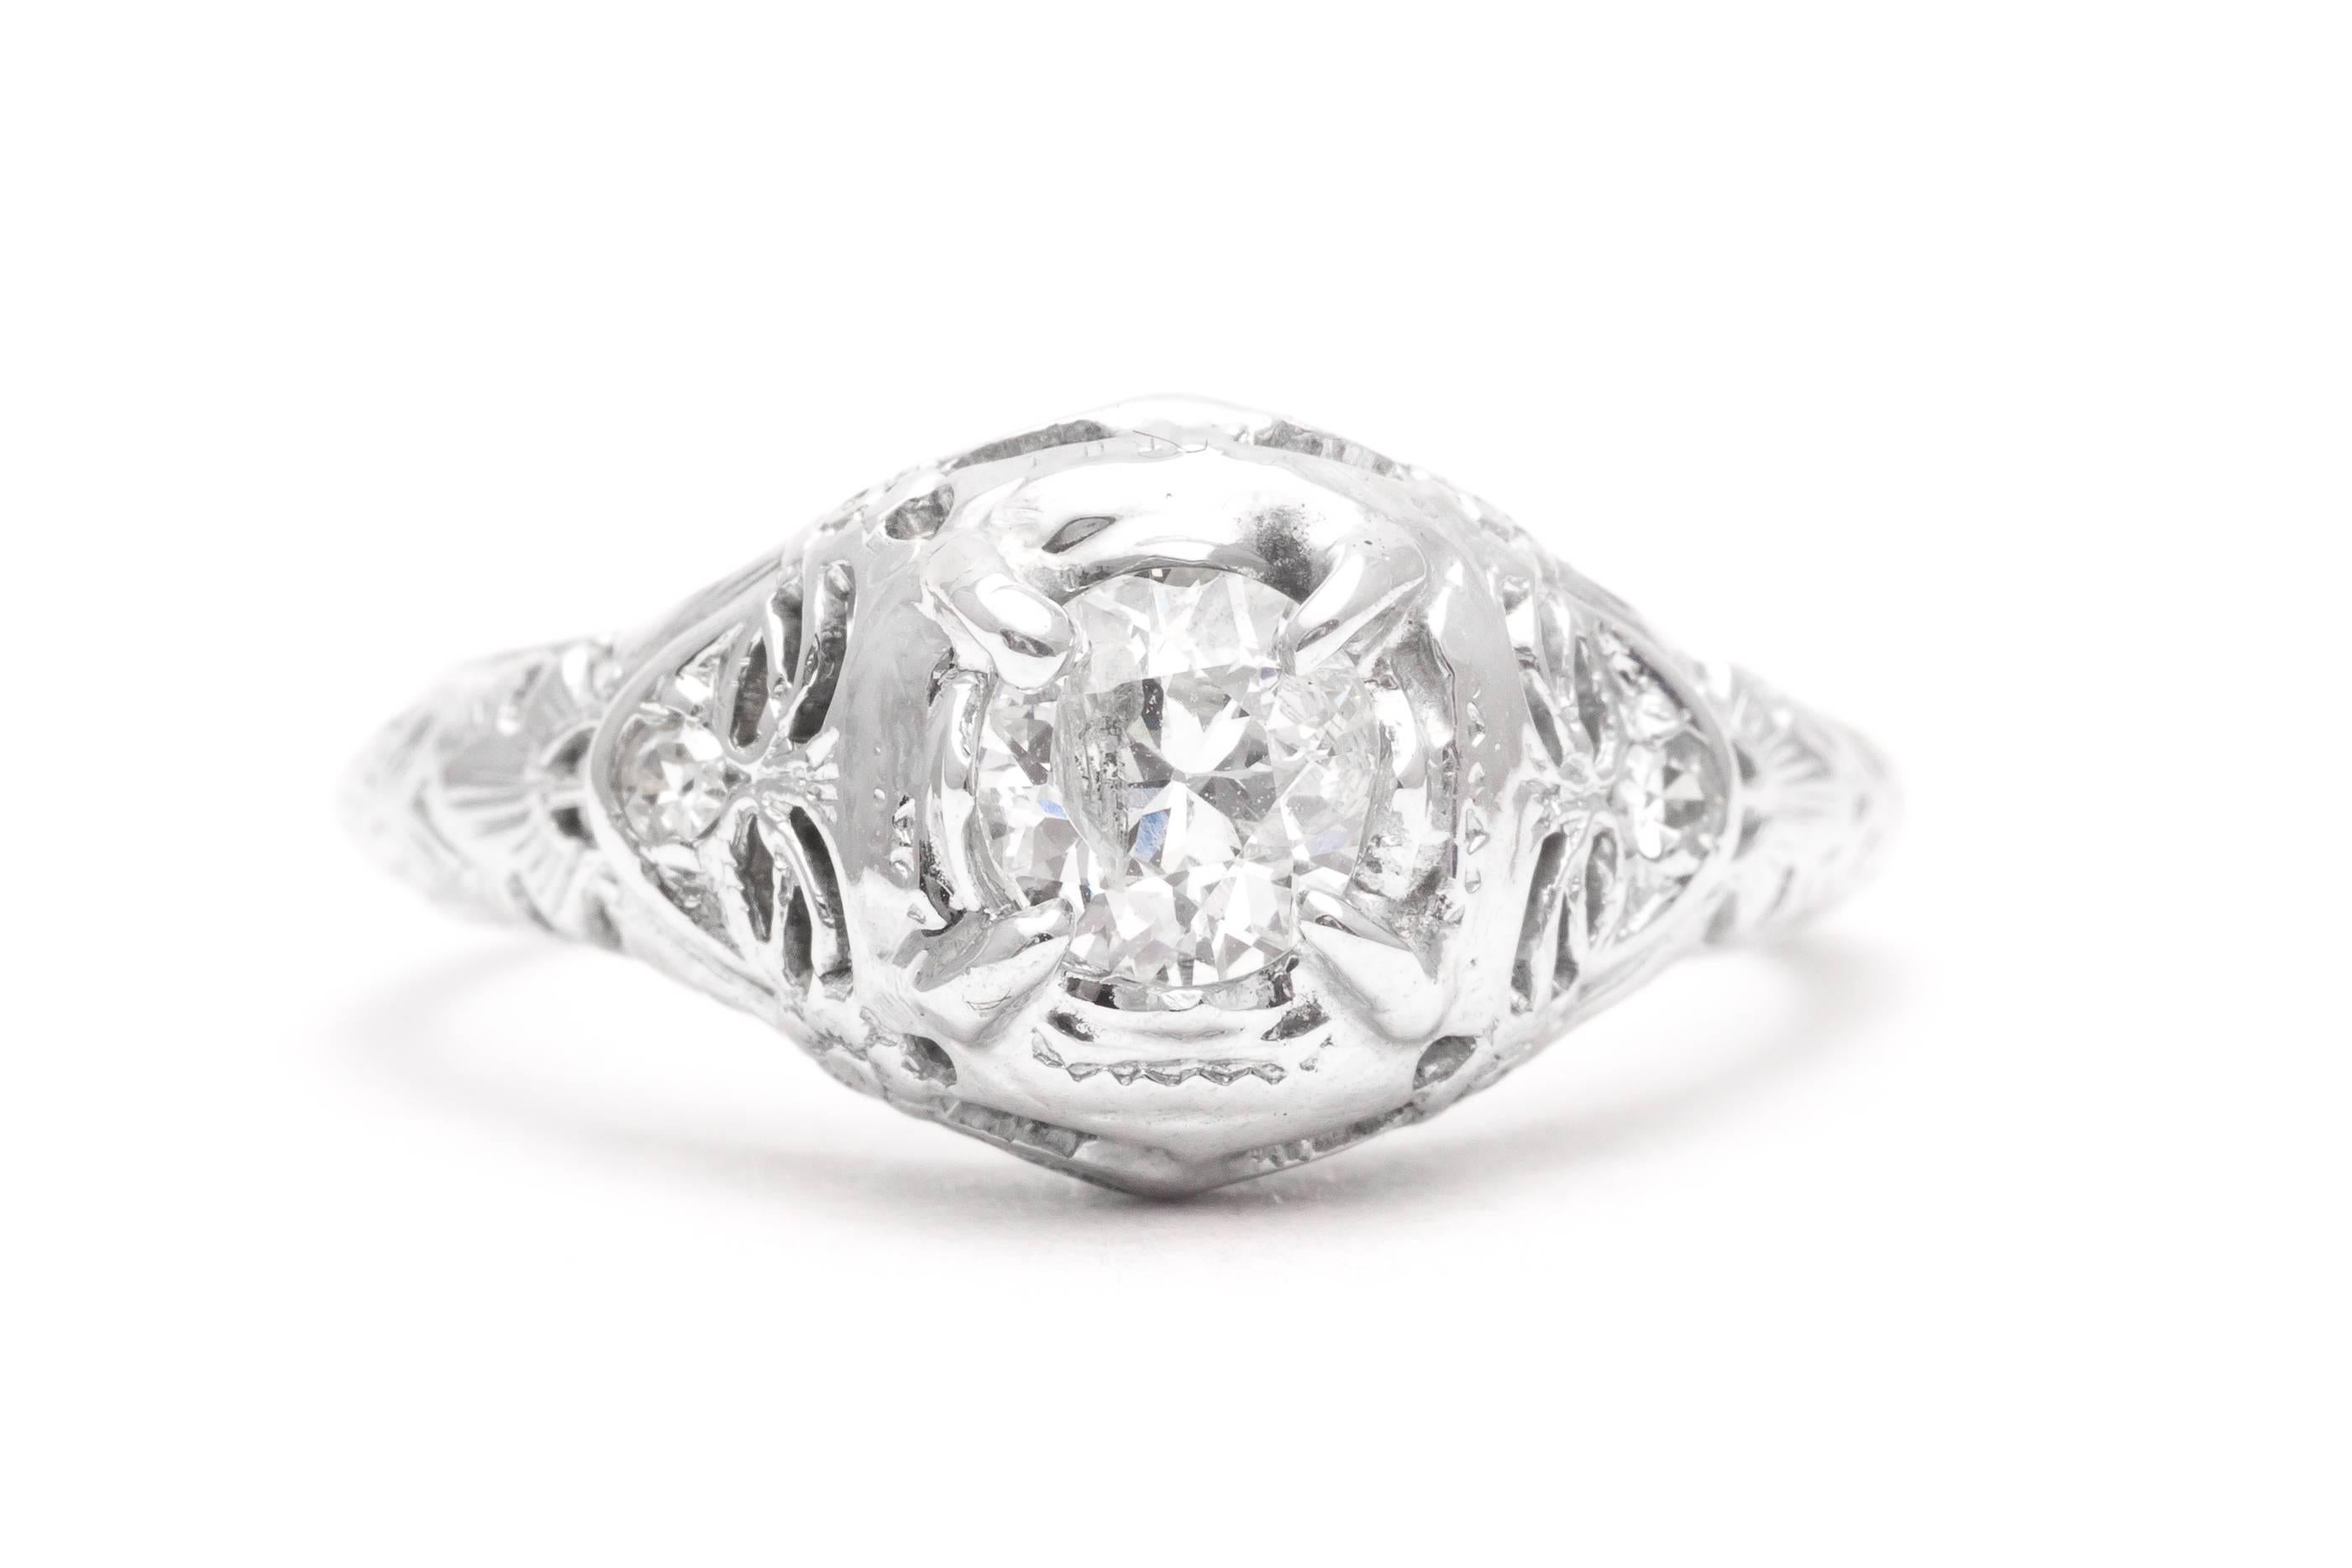 A sparkling original art deco period diamond engagement ring in 18 karat white gold. Centered by an antique European cut diamond and accented by two antique Swiss cut diamonds this ring features hand pierced filigree work complemented by hand